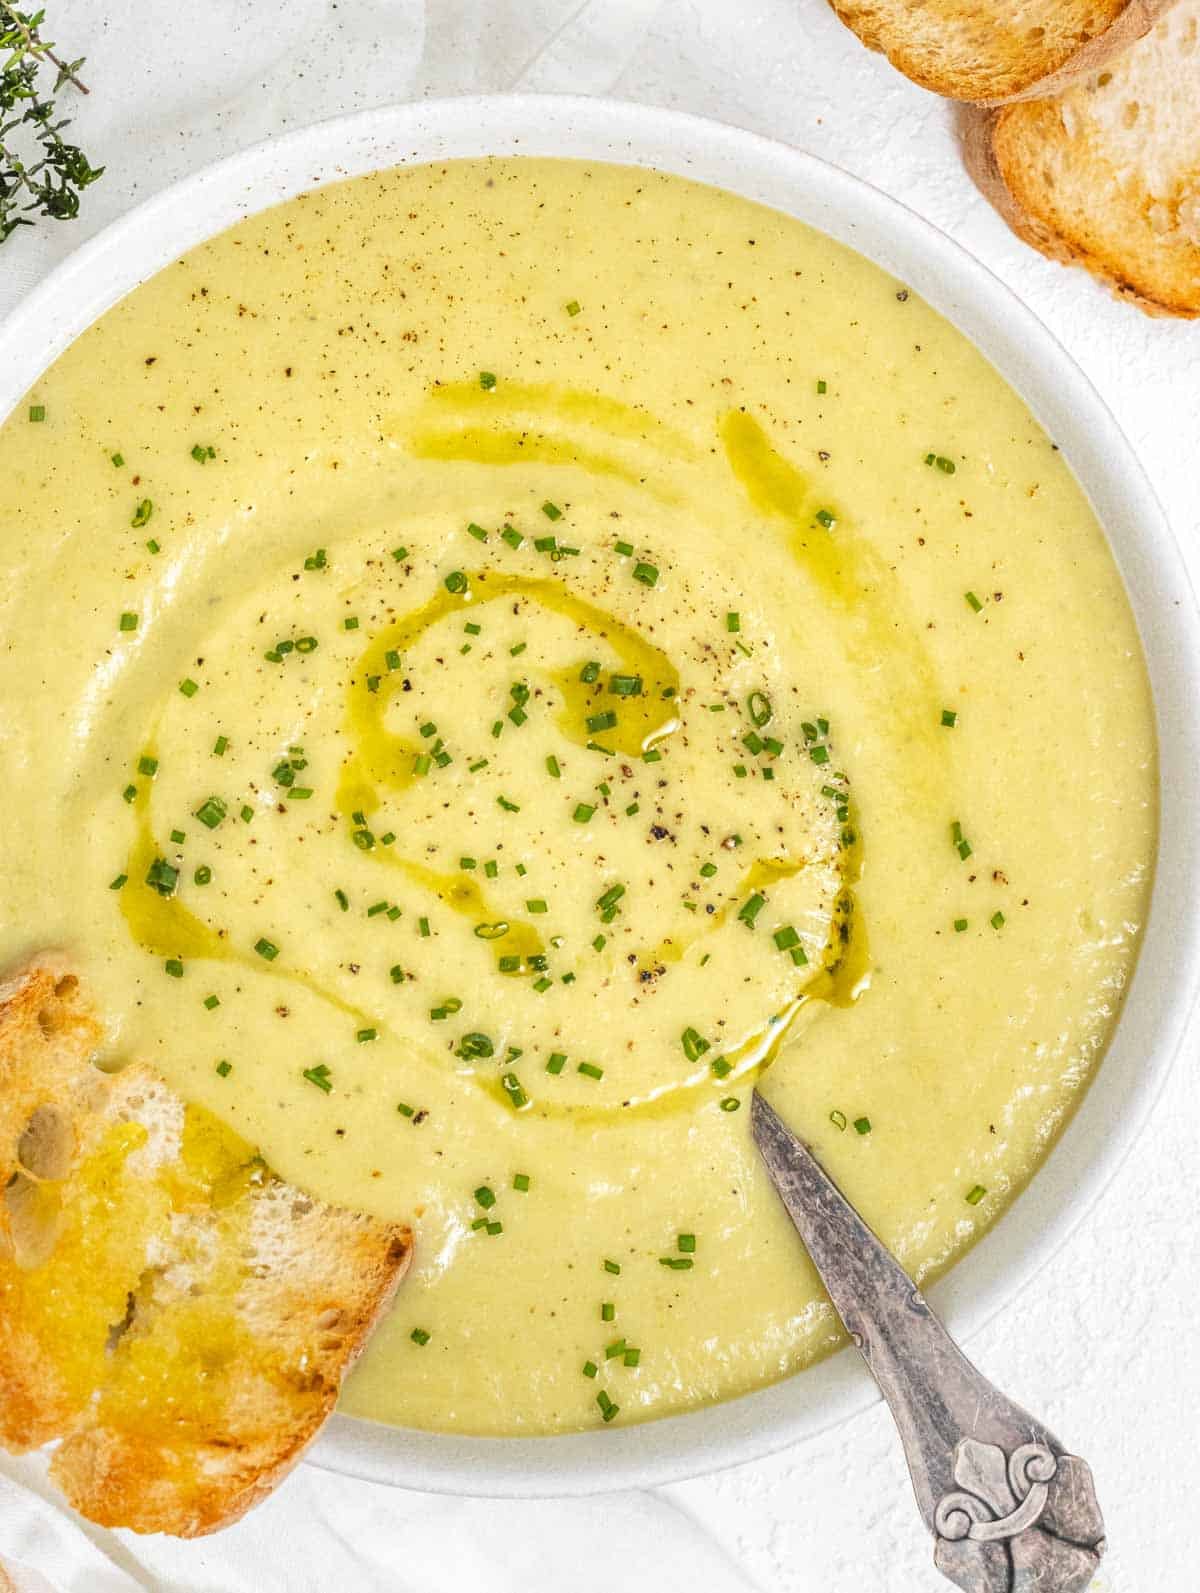 Potato leek soup with spoon and bread